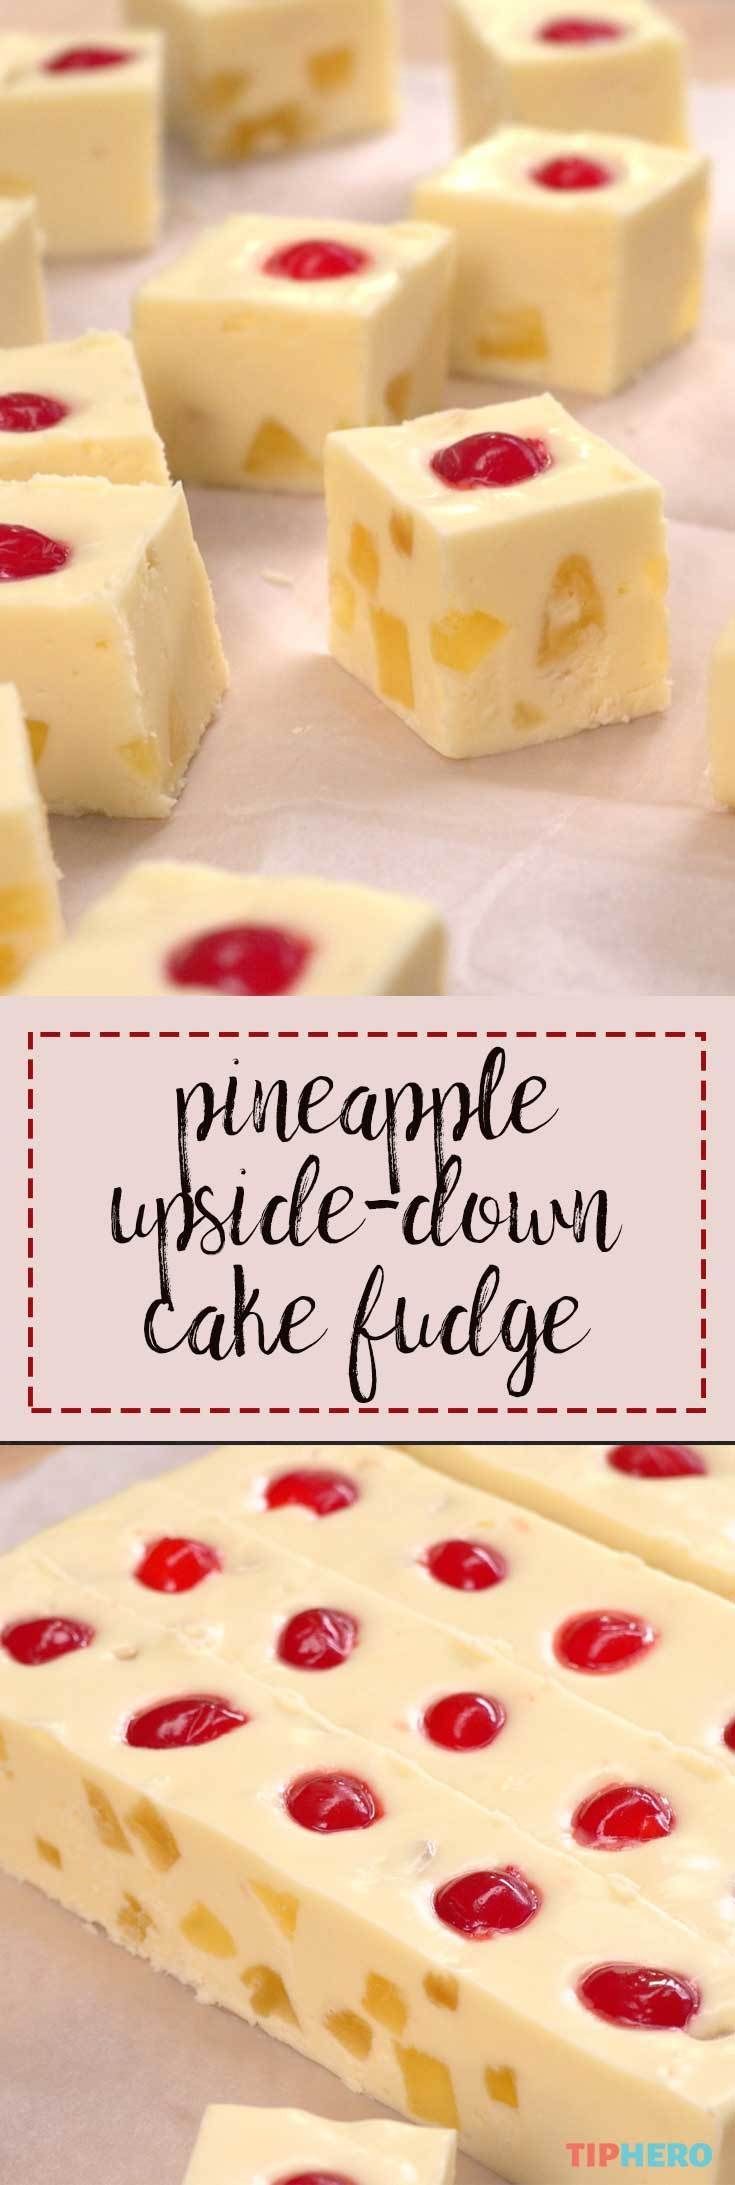 This recipe wraps two of our favorite things up into one: fudge & pineapple up